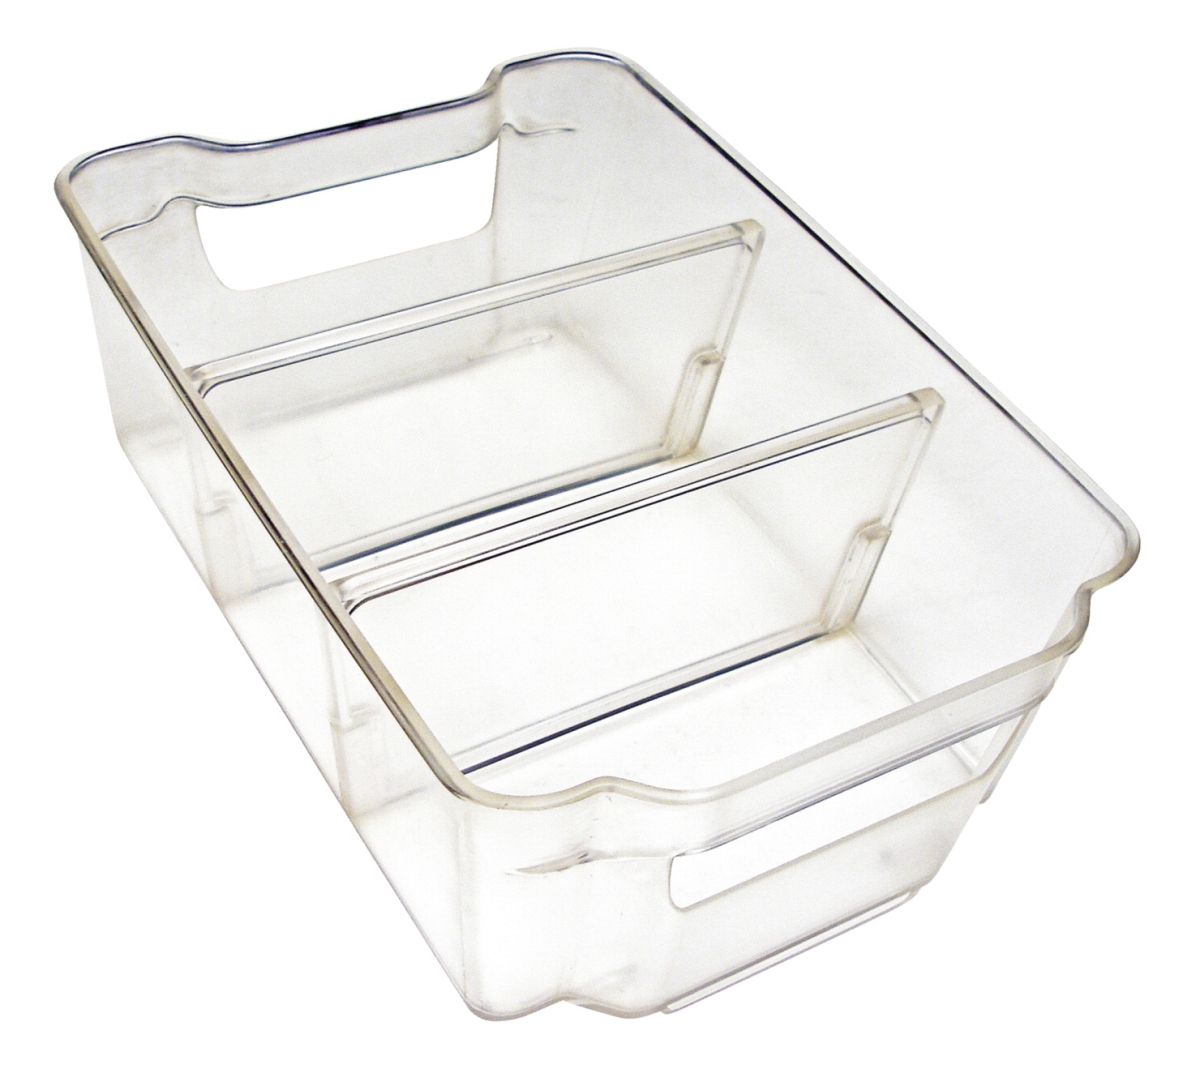 2006381 10.75 X 7 X 3.75 In. Storage Bin With Dividers, Clear